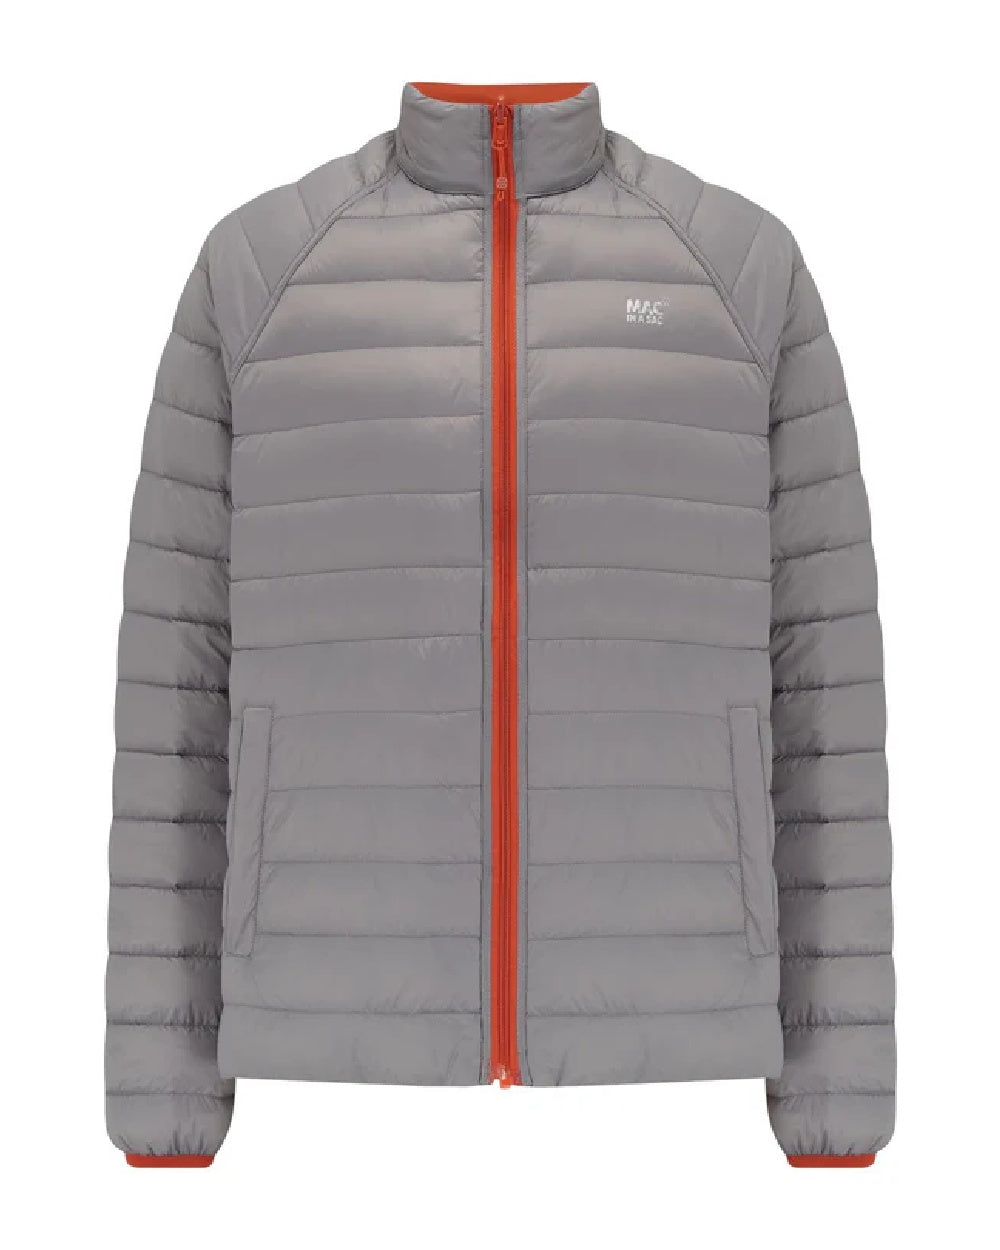 Burnt Orange Grey coloured Mac In A Sac Packable Mens Polar Down Jacket on white background 